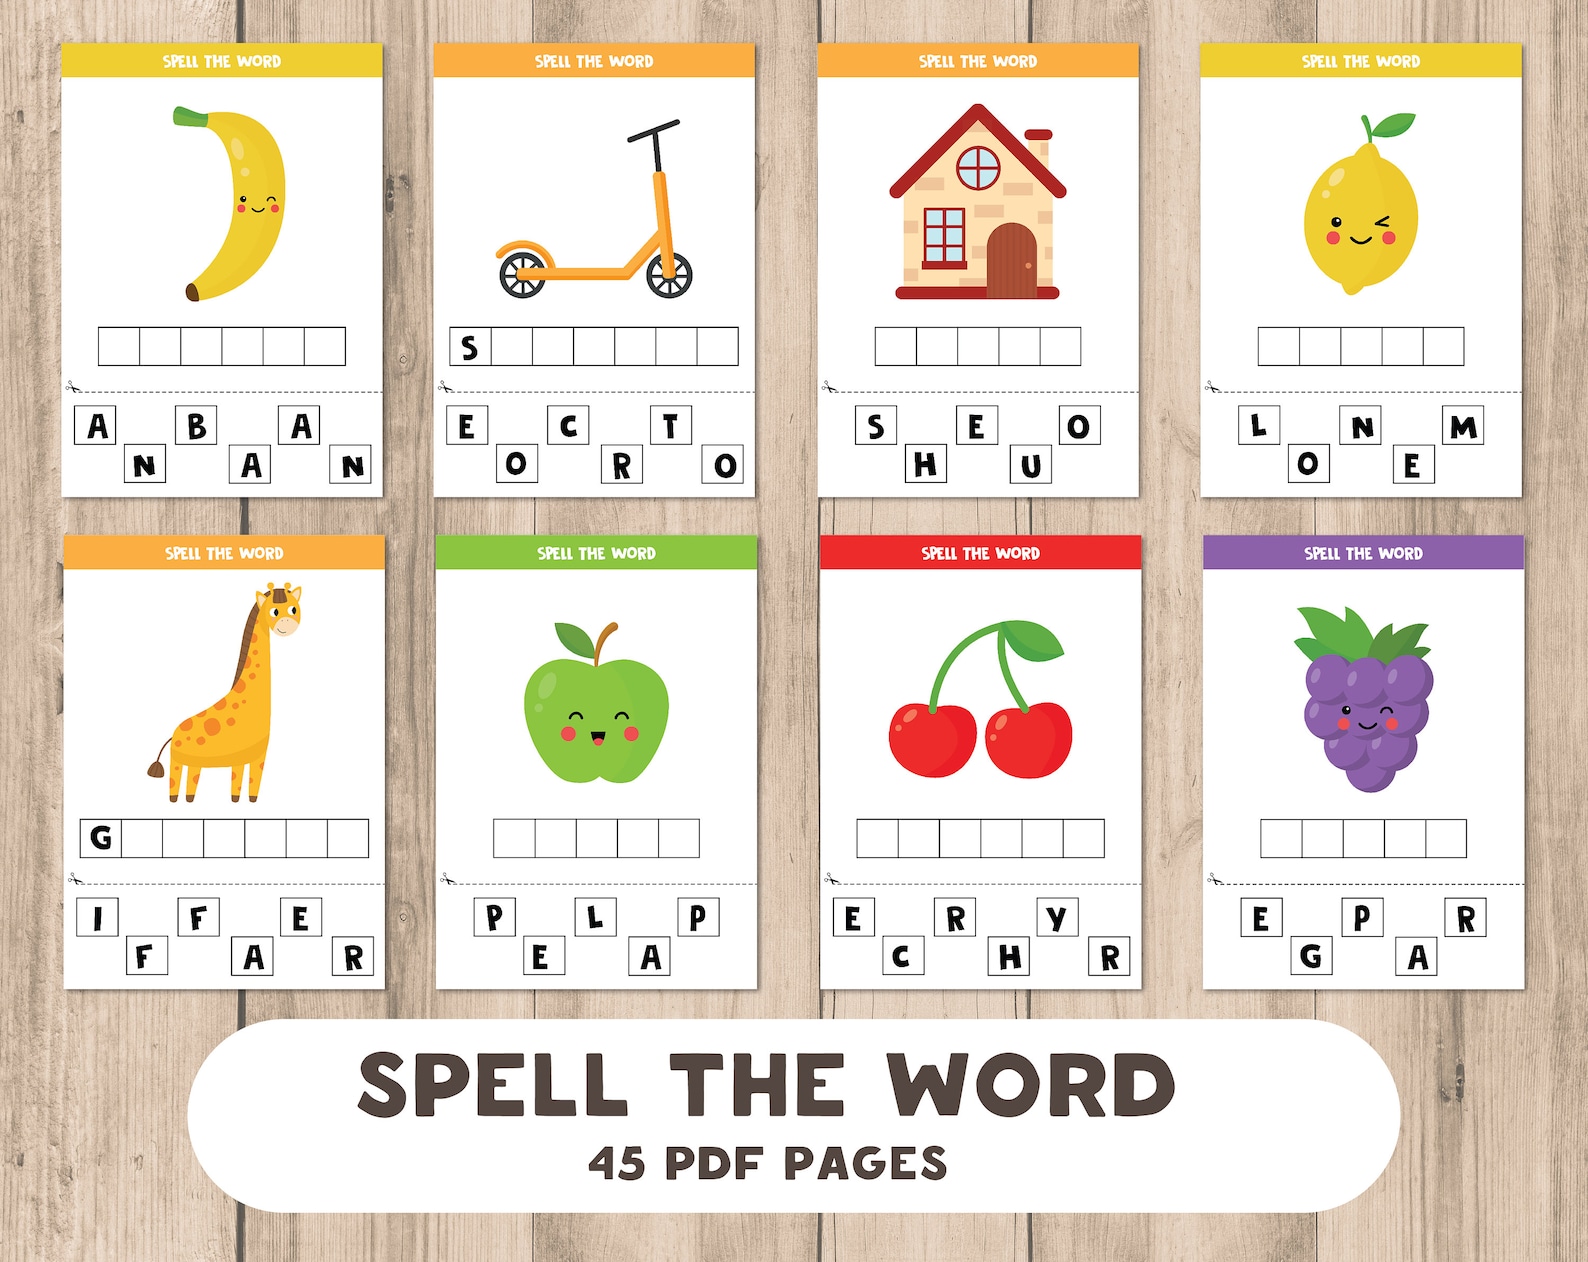 spell-the-word-preschool-worksheets-toddler-busy-book-quiet-etsy